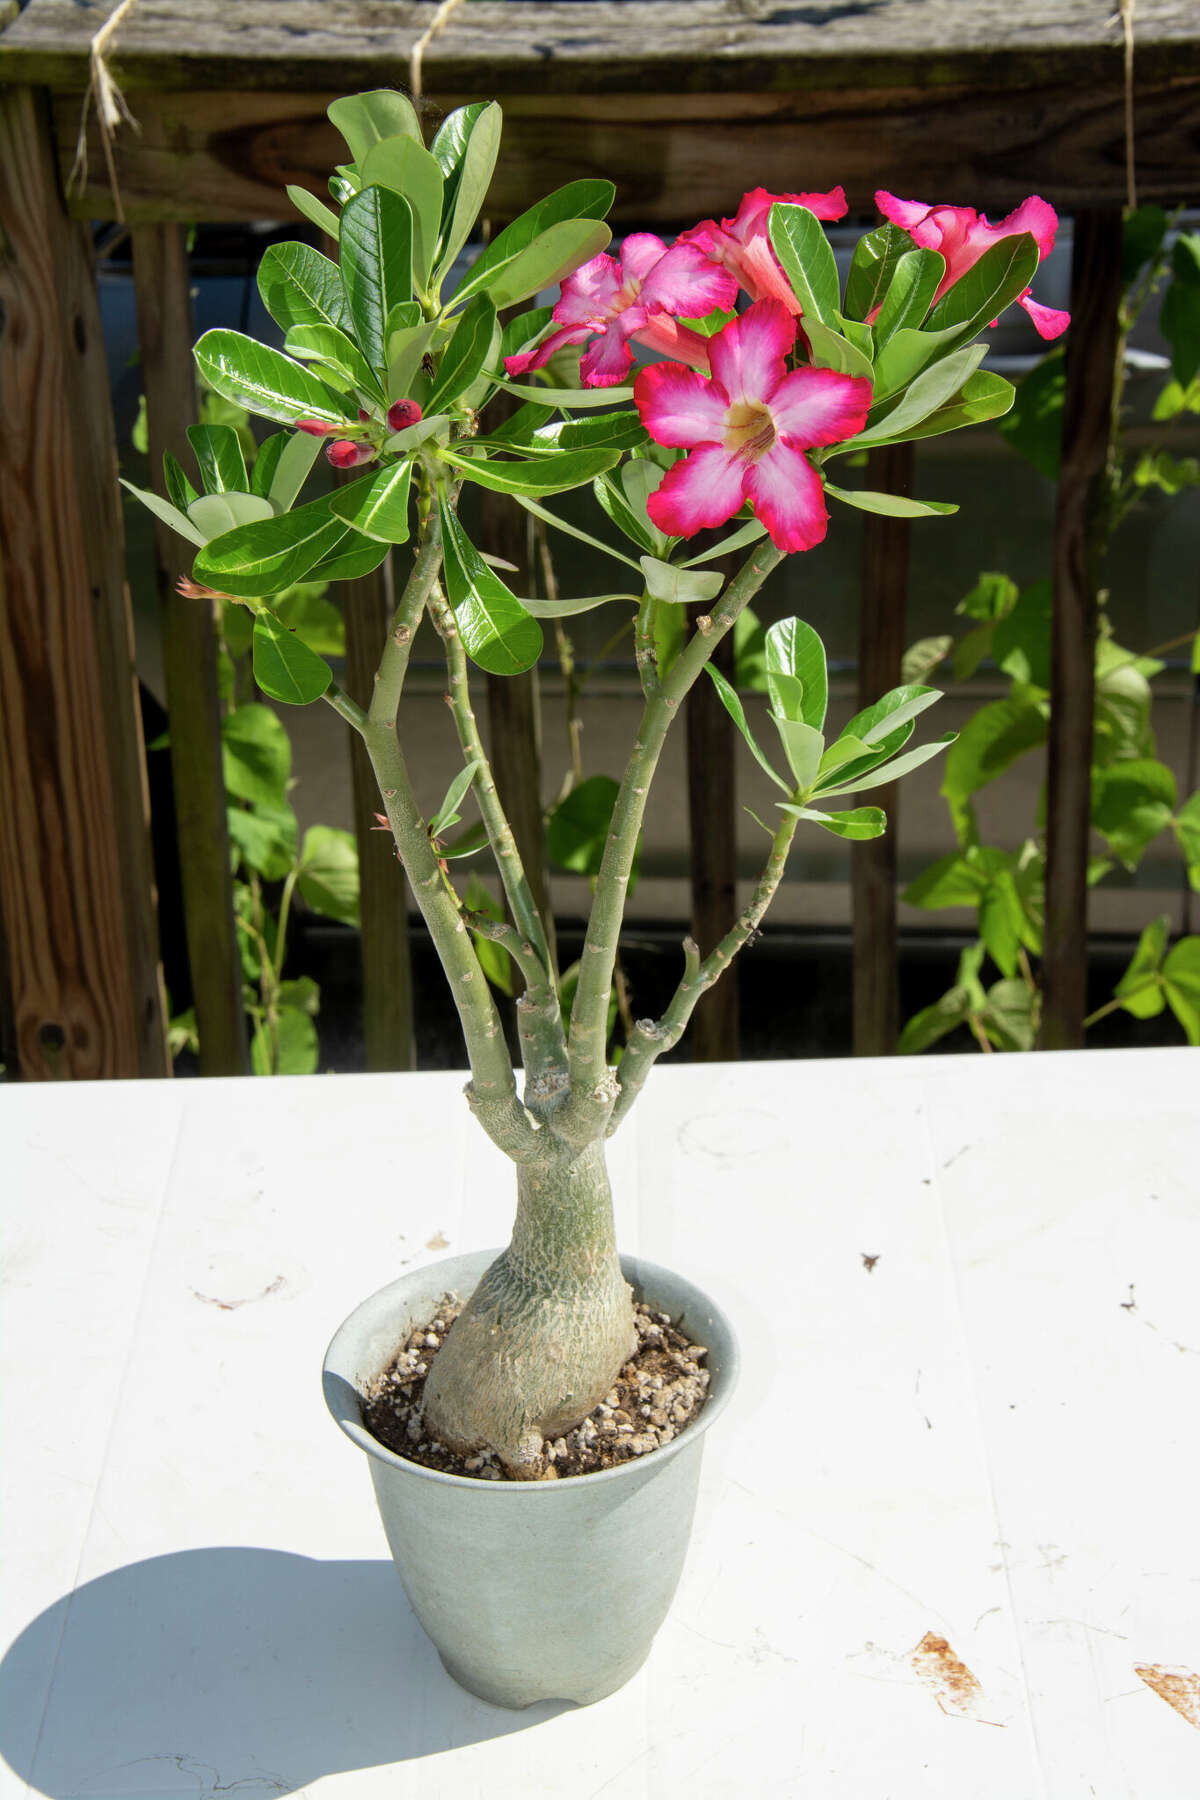 Desert rose plants (Adenium) will not survive outdoors in Illinois and will need to be brought indoors once temperatures begin to cool.